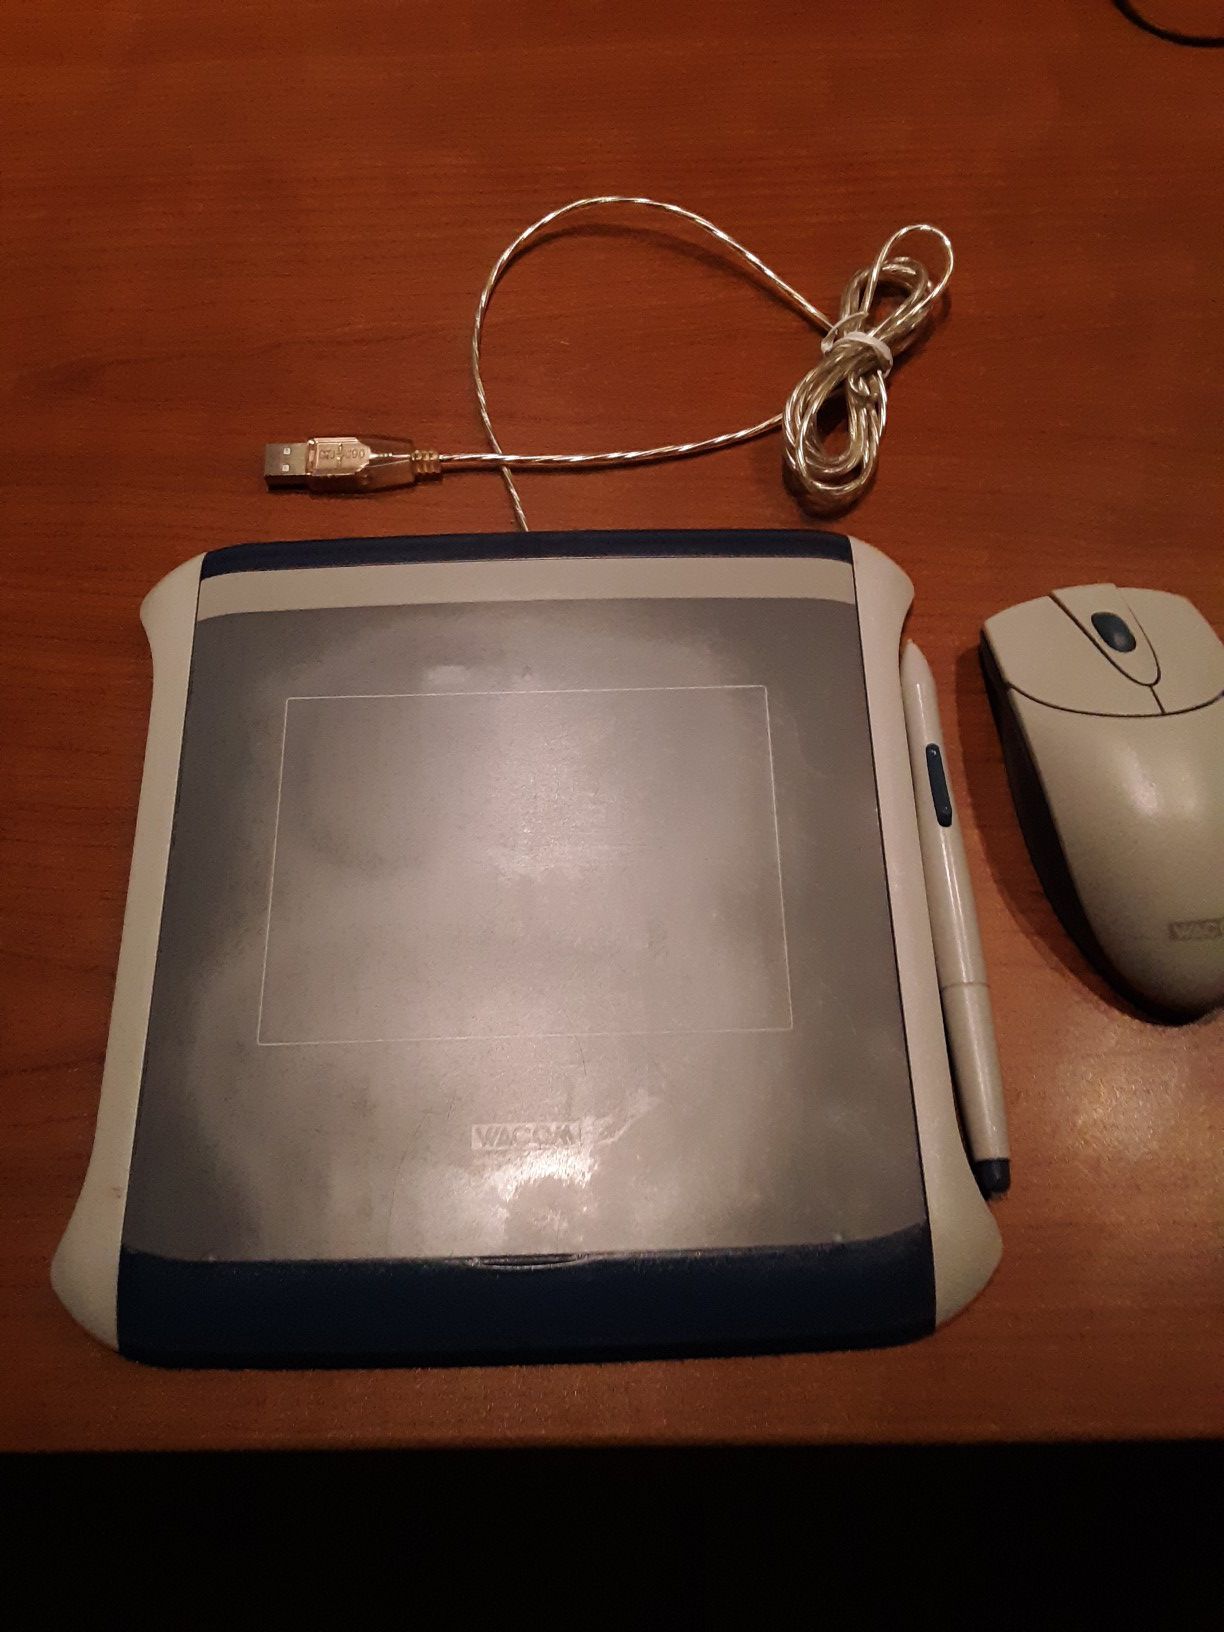 Digitizer, wireless mouse and wireless pen